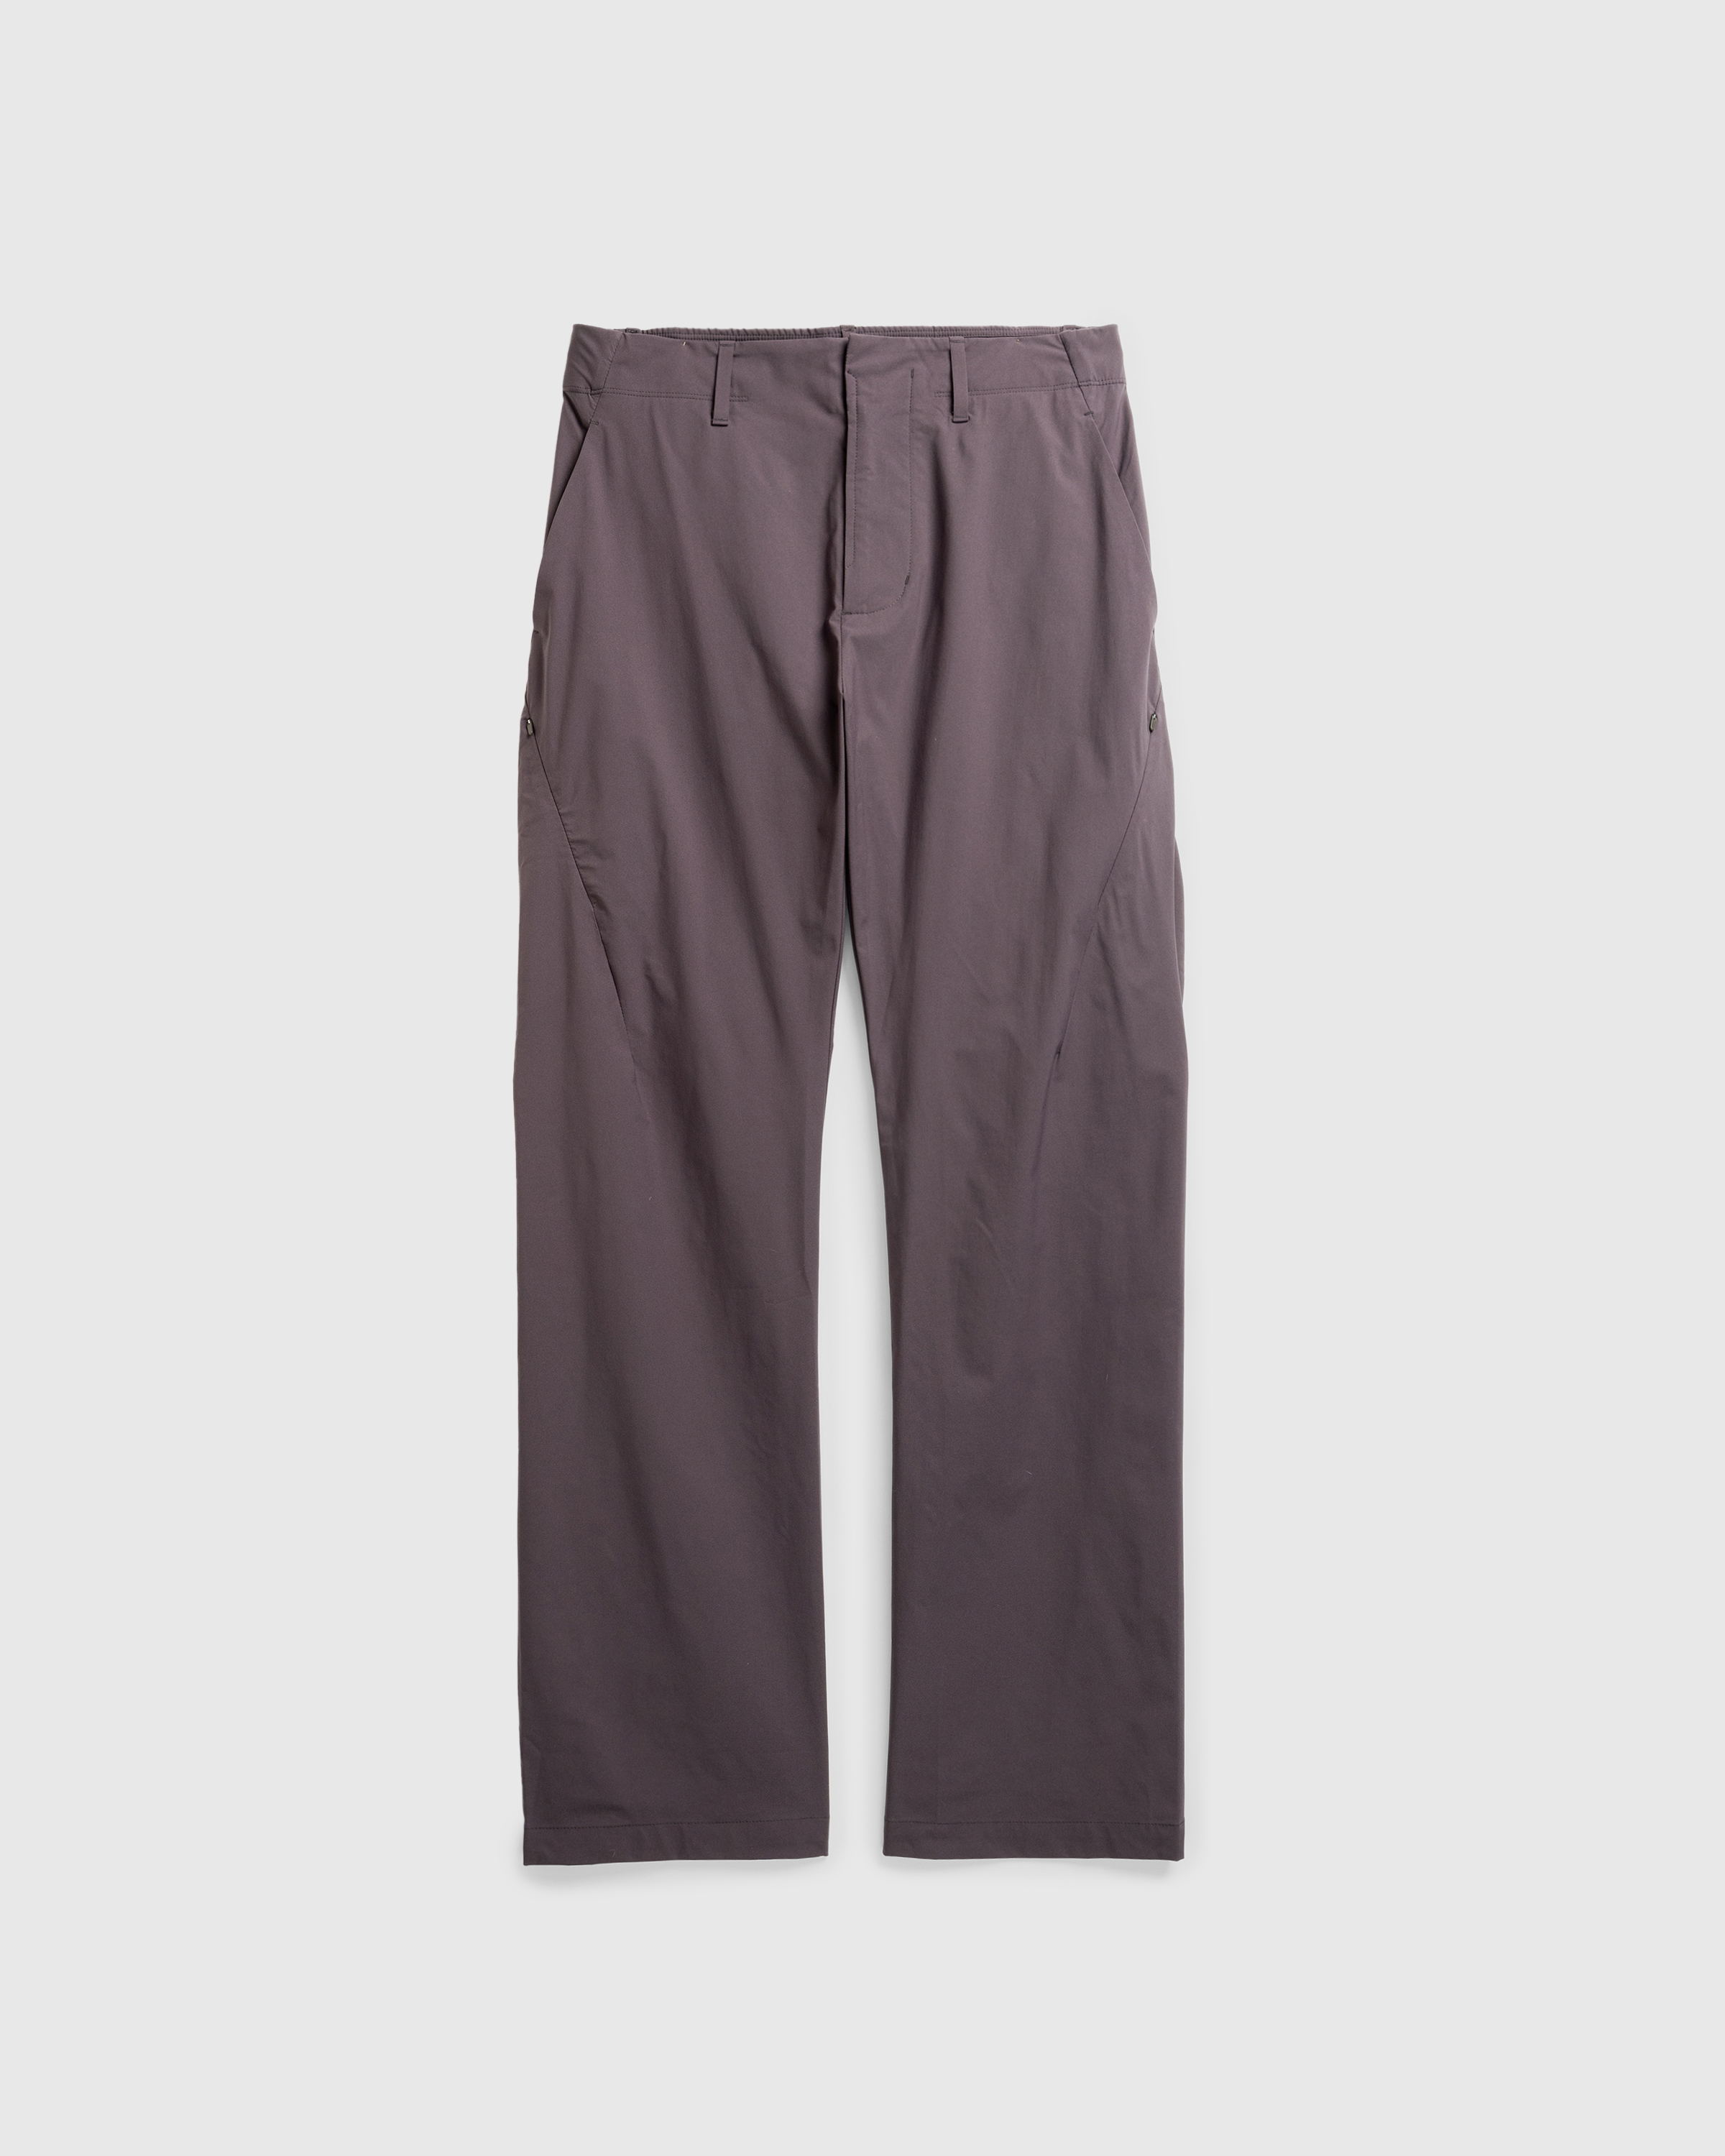 Post Archive Faction (PAF) – 6.0 Technical Pants Right Brown - Trousers - Brown - Image 1